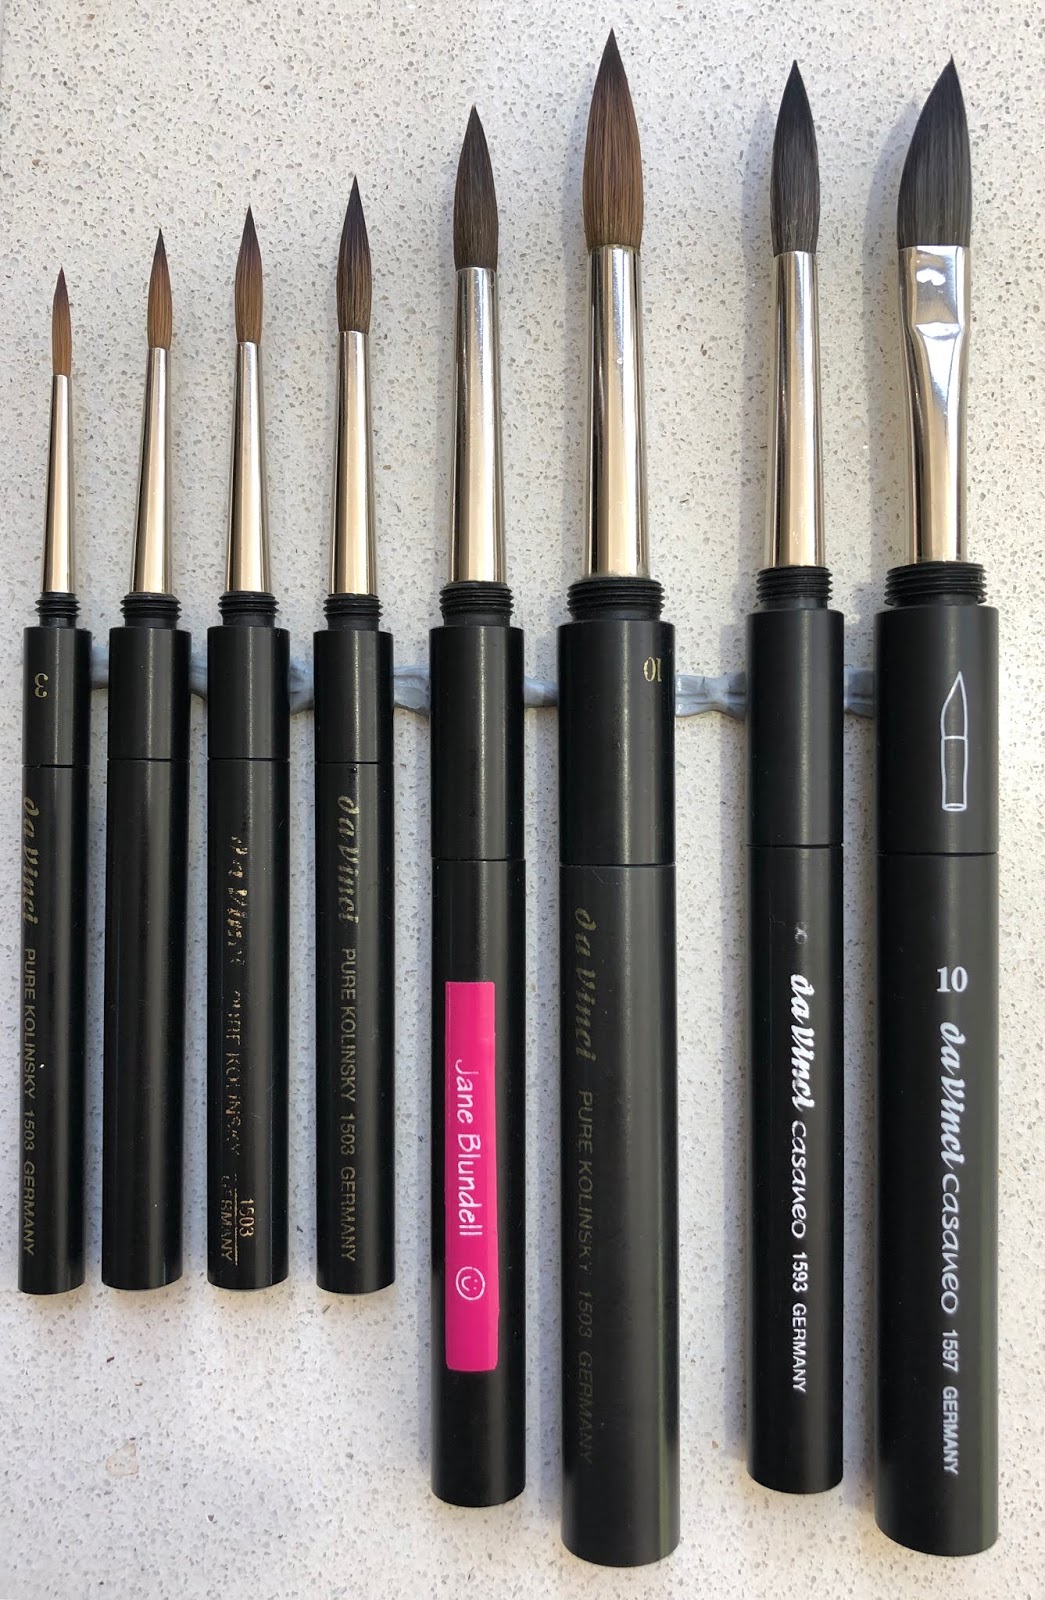 Comparing Mop and Travel Brushes